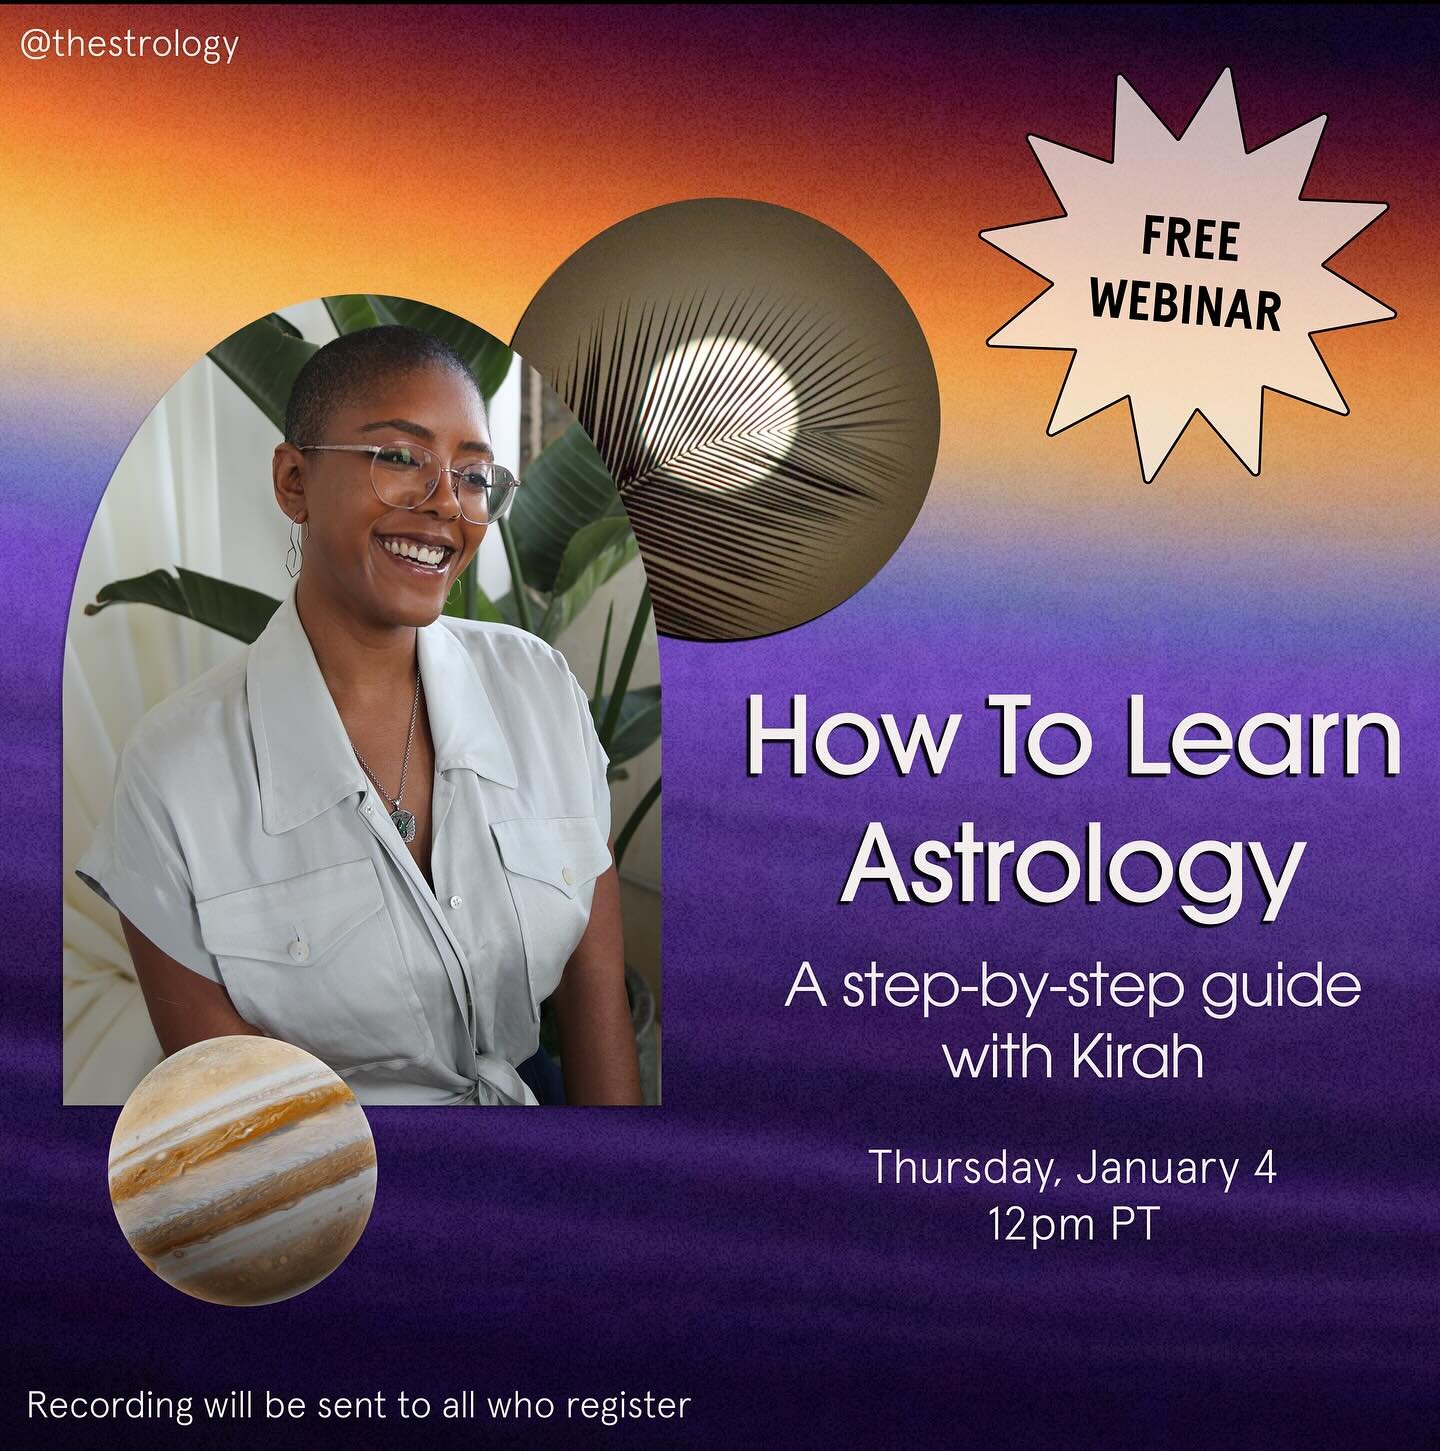 Announcing my newest webinar, How To Learn Astrology: A Step-by-step Guide.

&ldquo;Where Do I Begin?&rdquo; is a question I&rsquo;ve been hearing on repeat for nearly 10 years now. It&rsquo;s a great question and one that I think a lot of astrologer